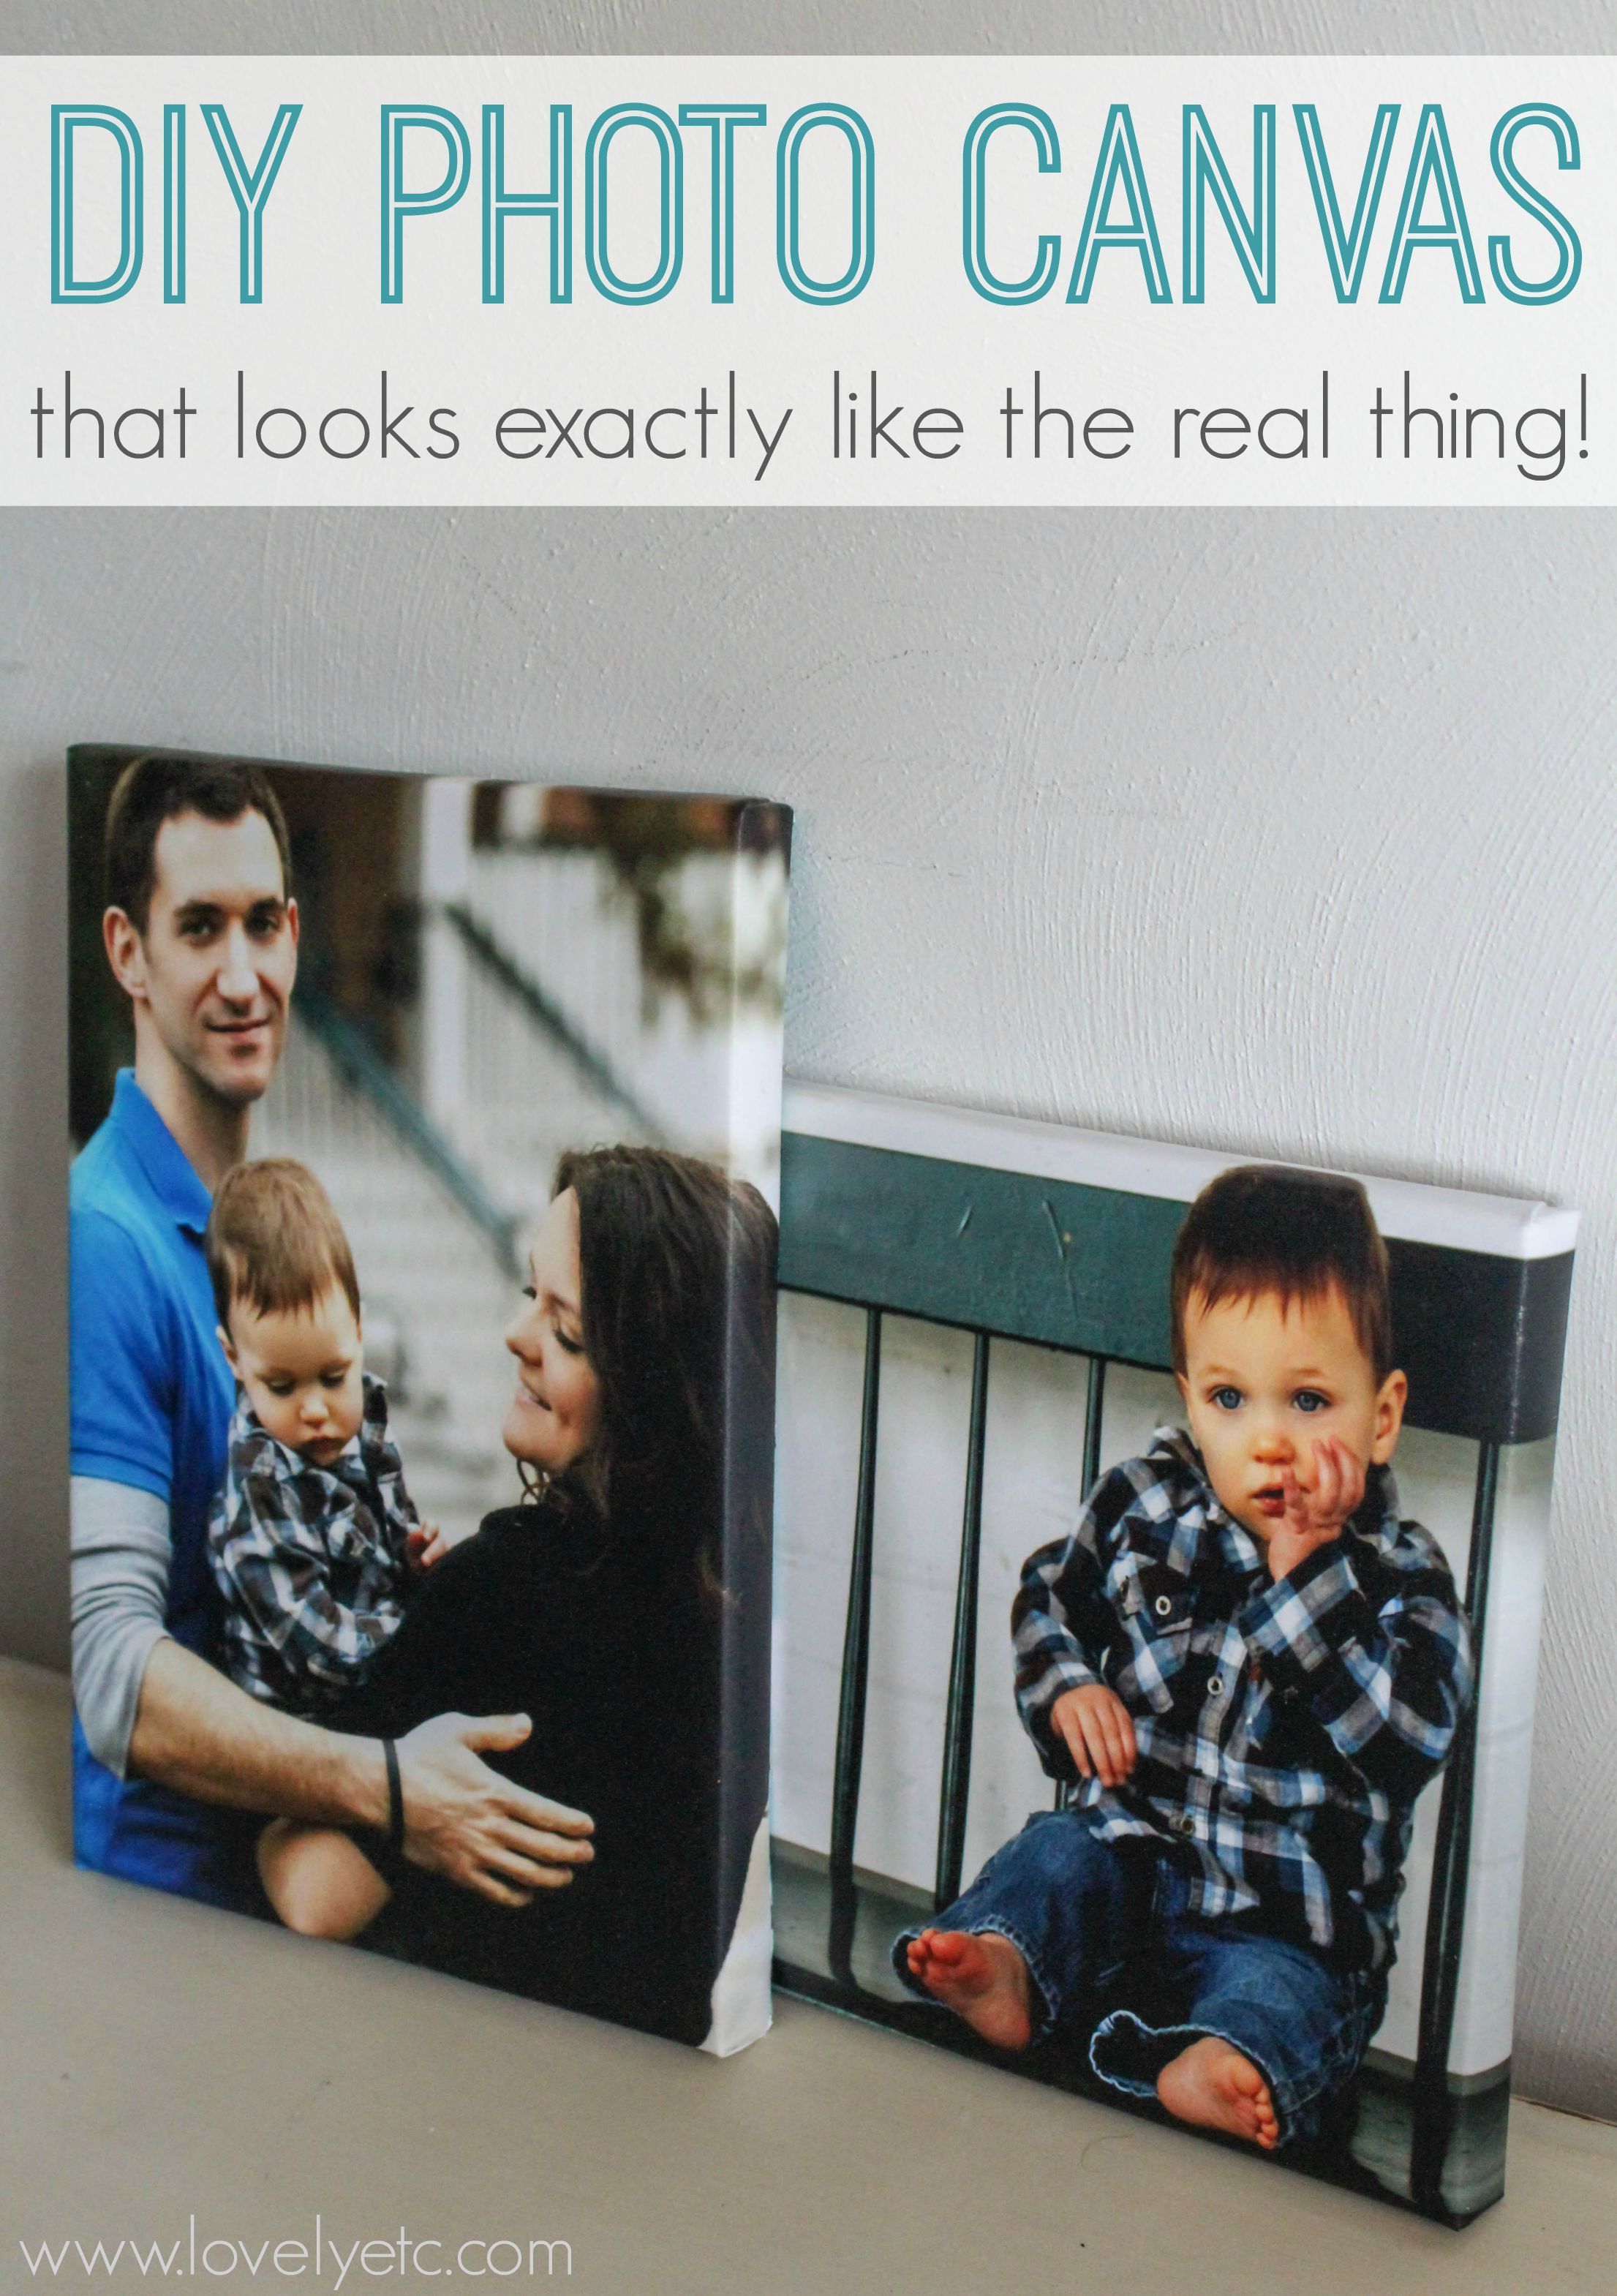 DIY Photo Canvas That Looks Exactly Like The Real Thing – Lovely Etc.